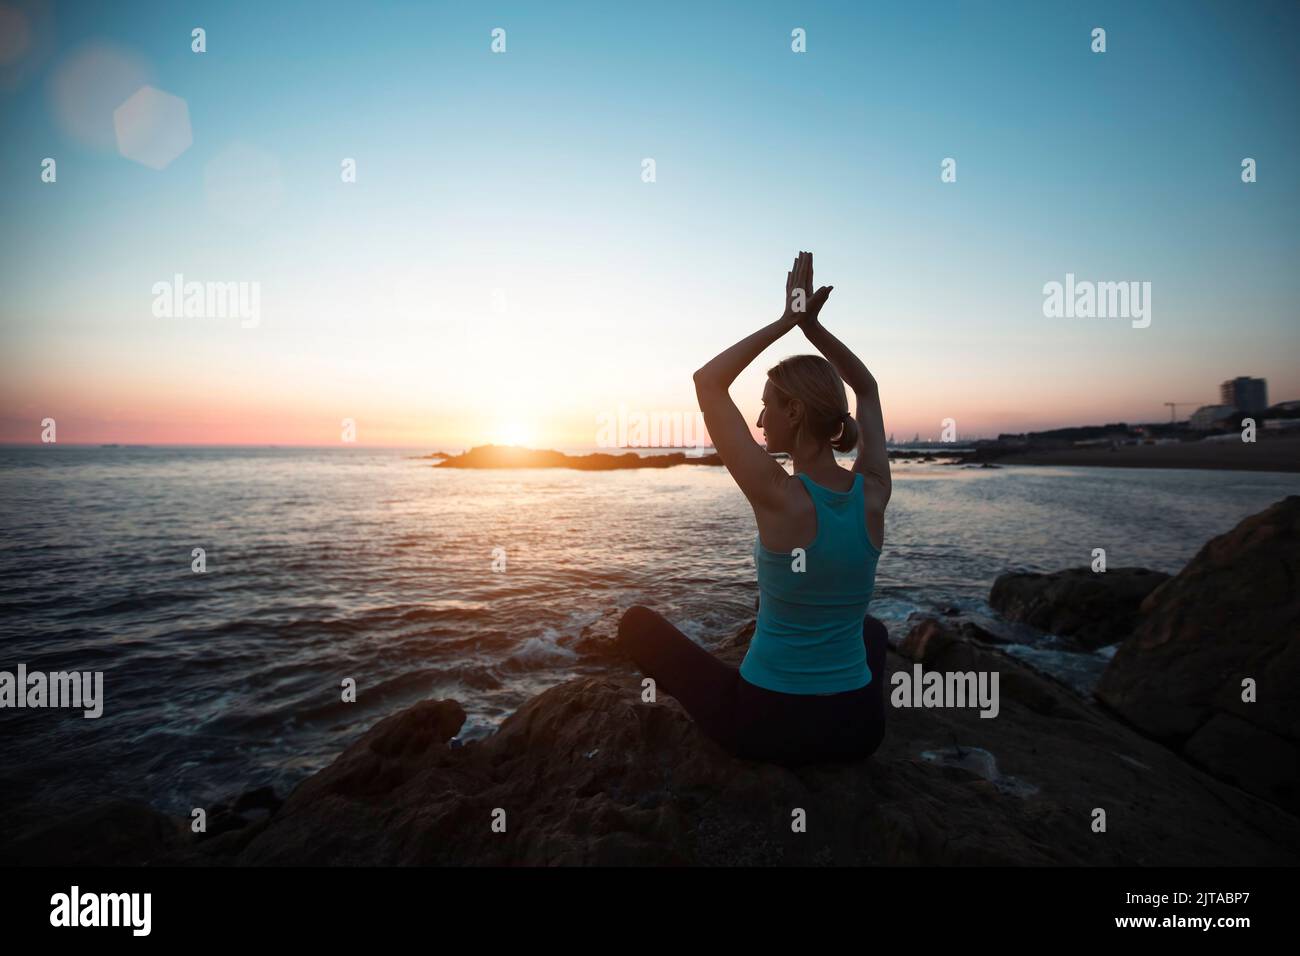 A middle-aged woman of athletic build does yoga, meditating on the ocean beach during a beautiful sunset. Stock Photo